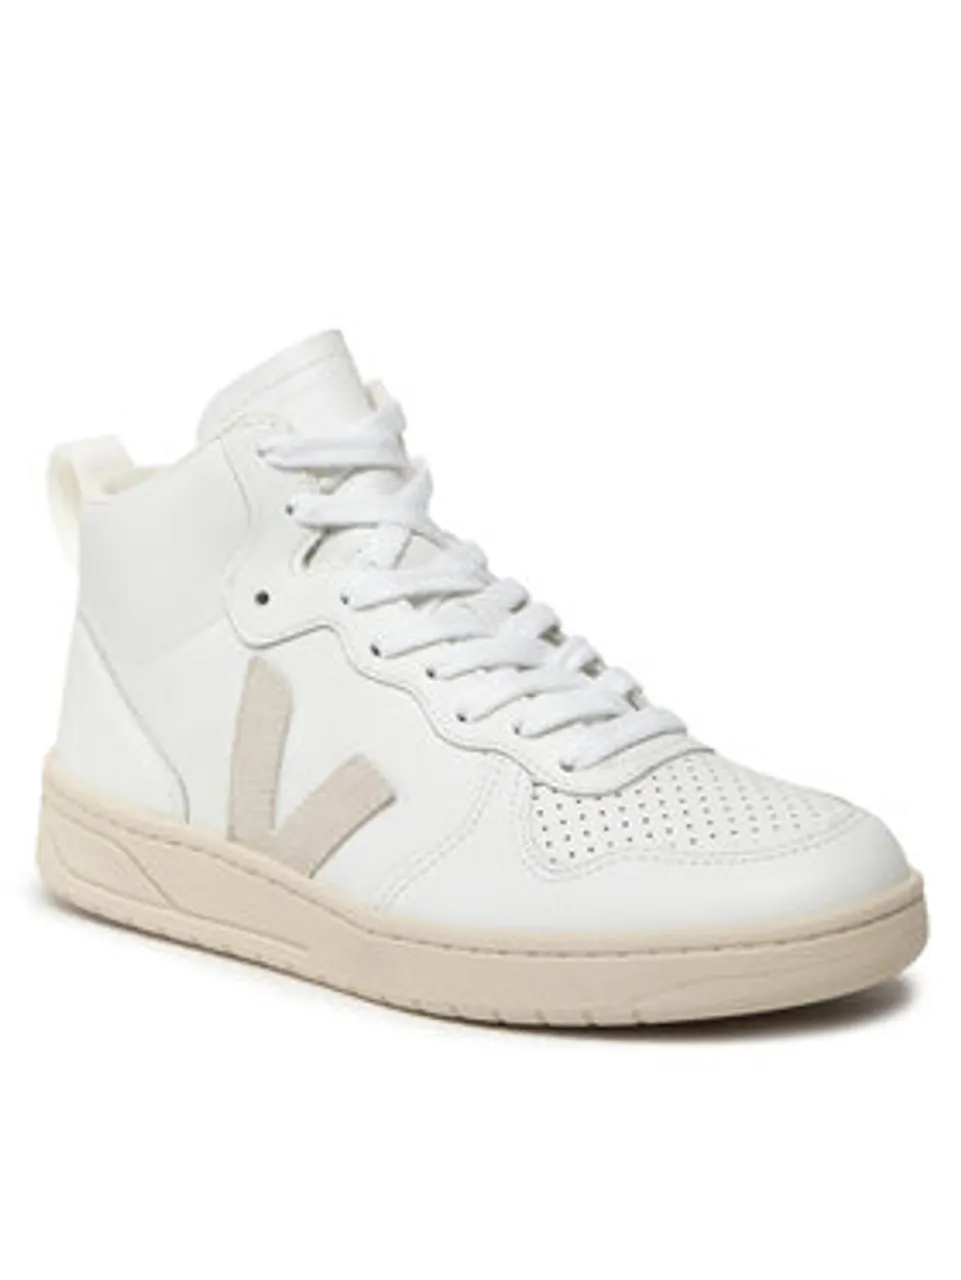 Veja Sneakers V-15 Leather VQ0201270A Weiß